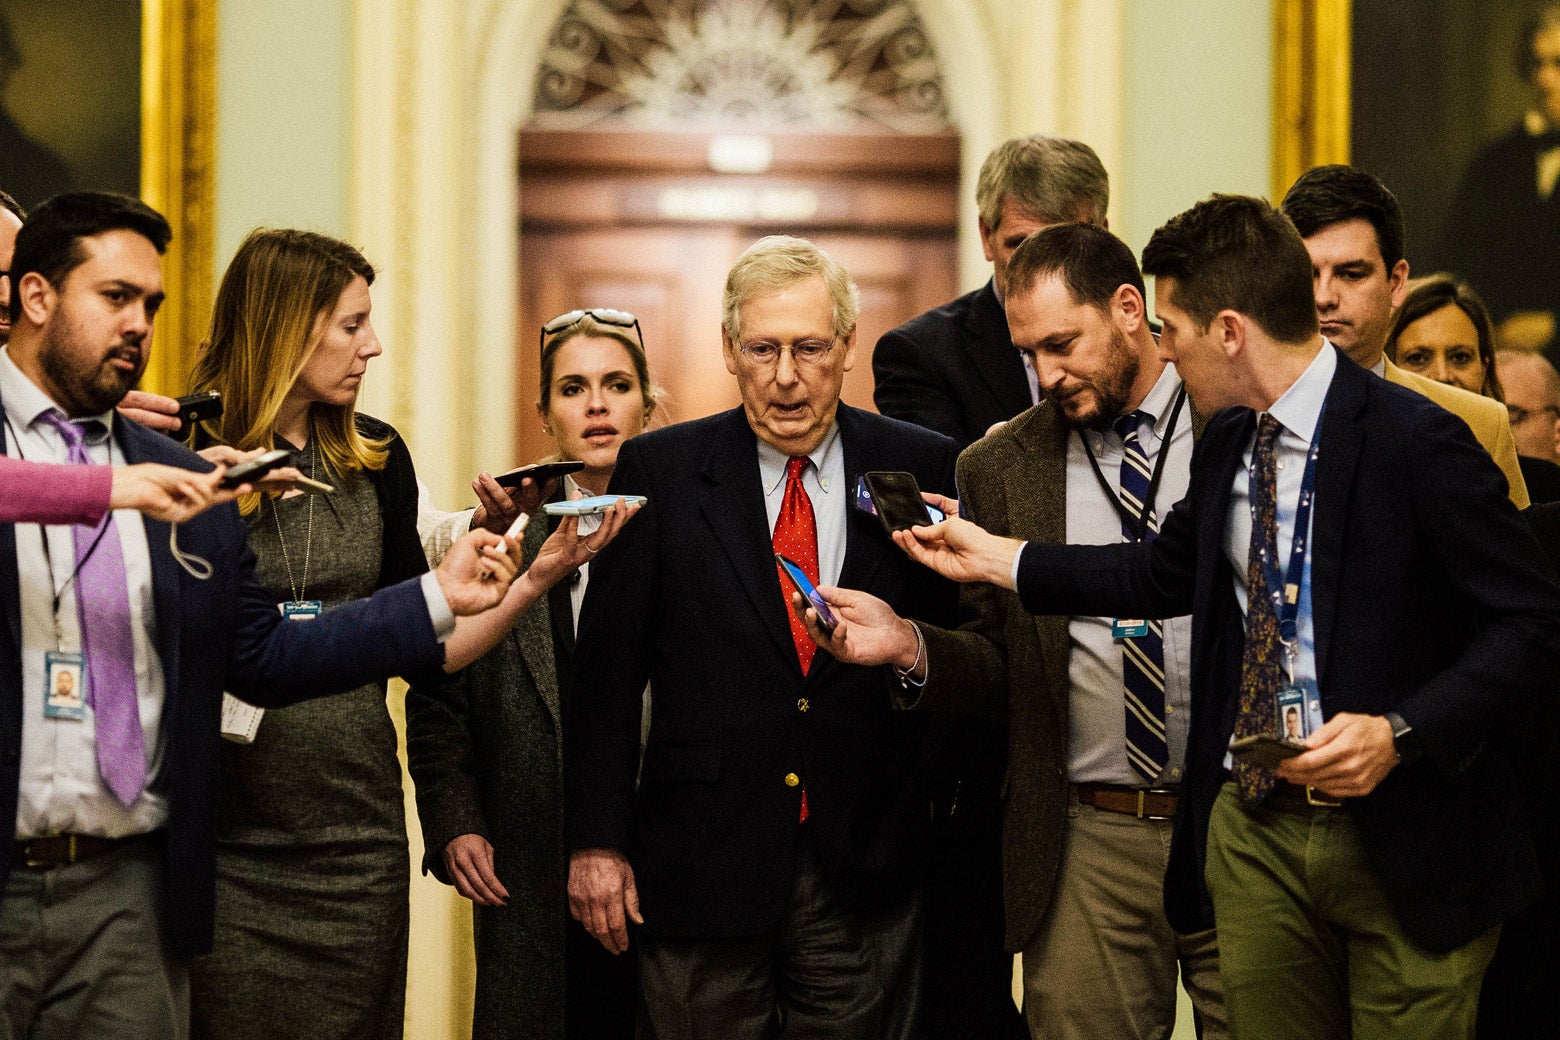 McConnell surrounded by reporters holding their phones out, trying to get a quote from him.